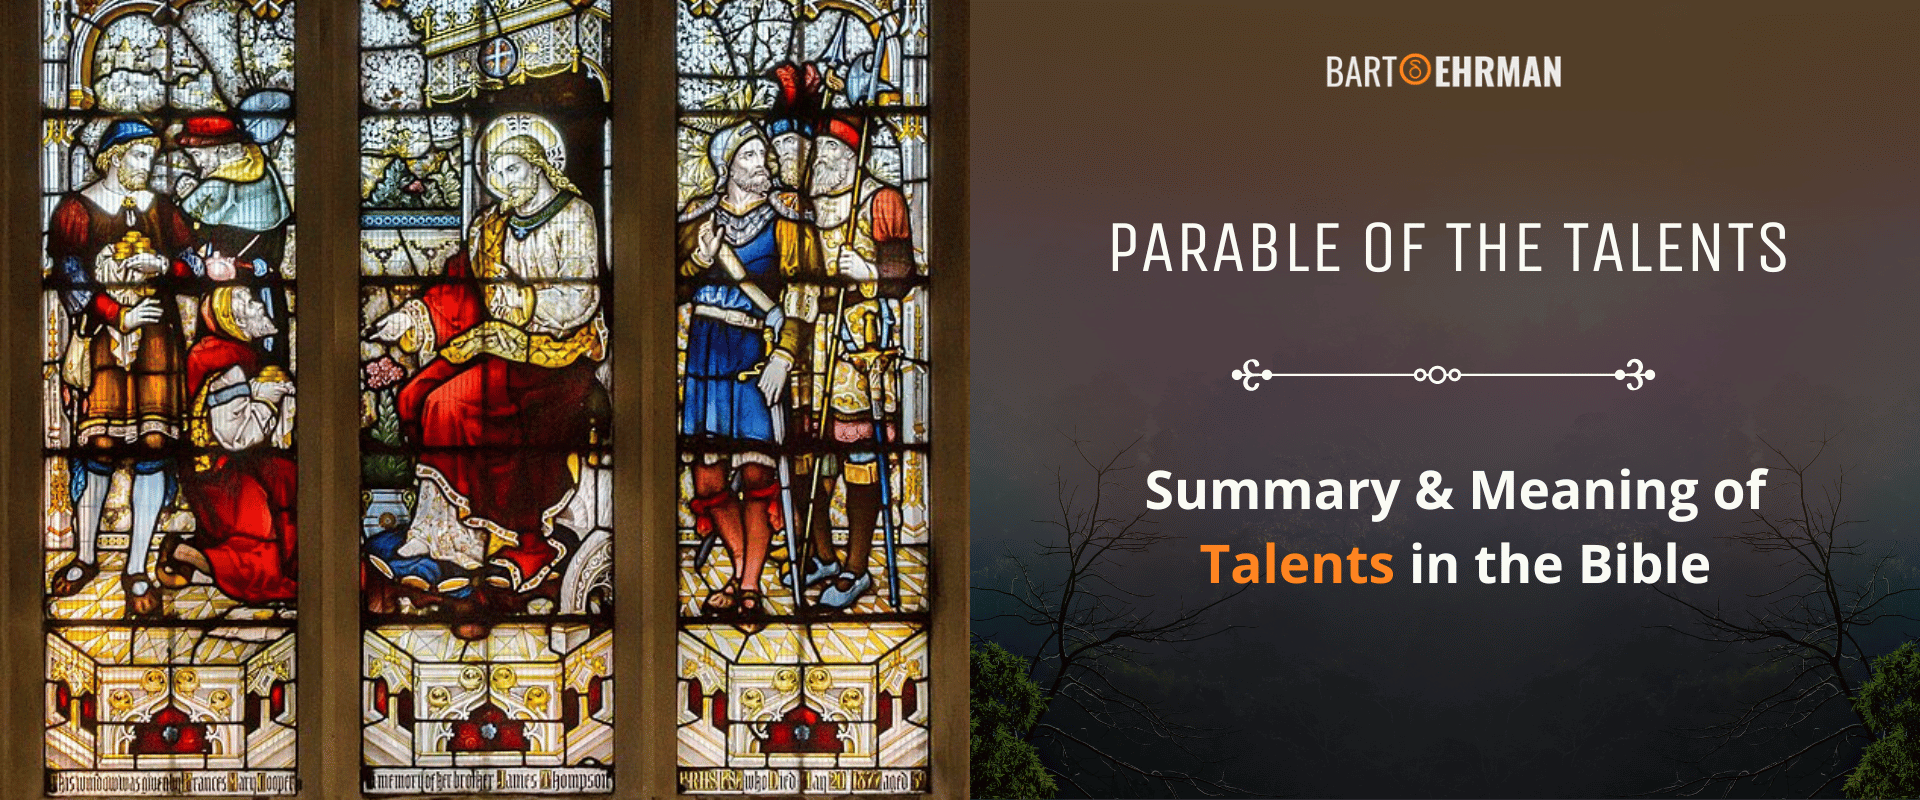 Parable of the Talents Summary & Meaning of Talents in the Bible